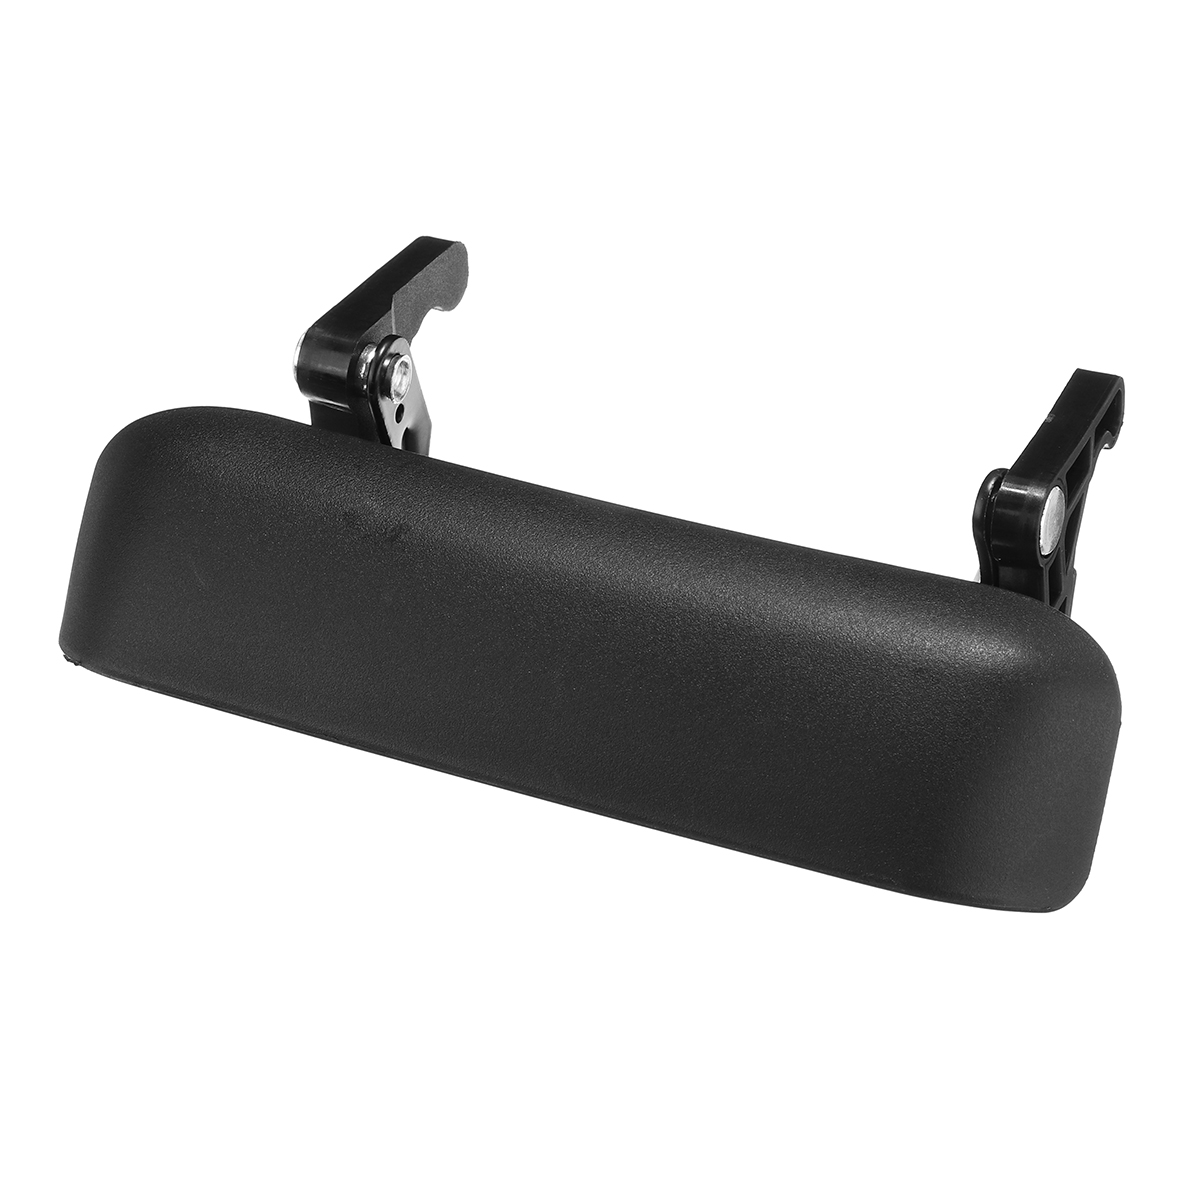 Car Tailgate Tail Gate Door Handle for Ford Ranger 93-11 F150 92-96 Mazda Pickup 1993-2010